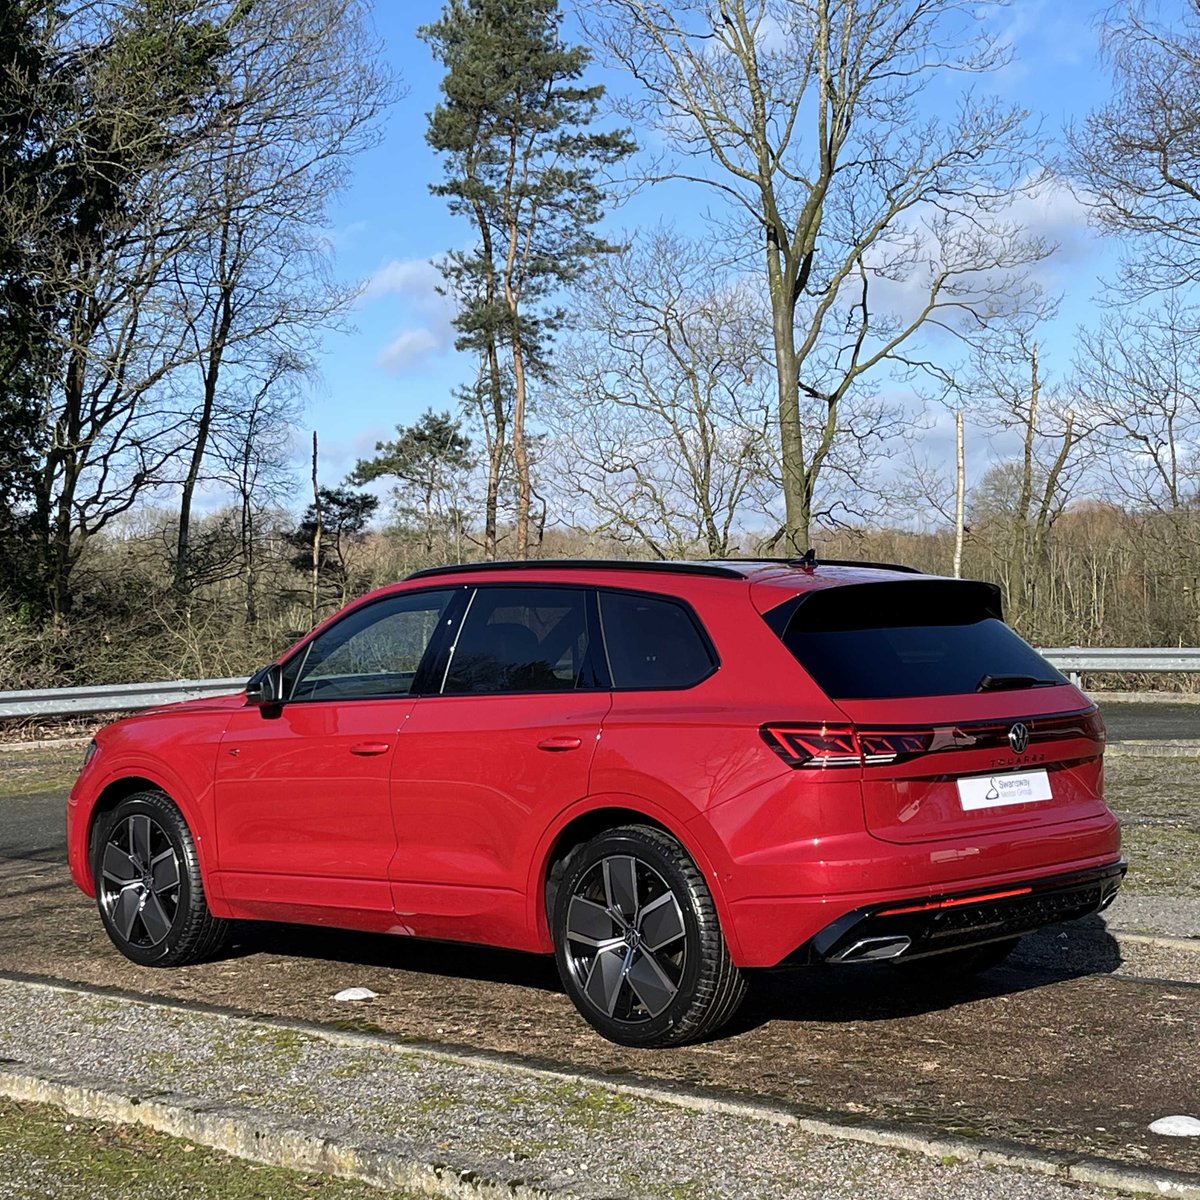 The new VW Touareg in Chilli Red might be one of our new favorites! 😍 What do you think?! #vw #touareg #chillired #car #newcar #new